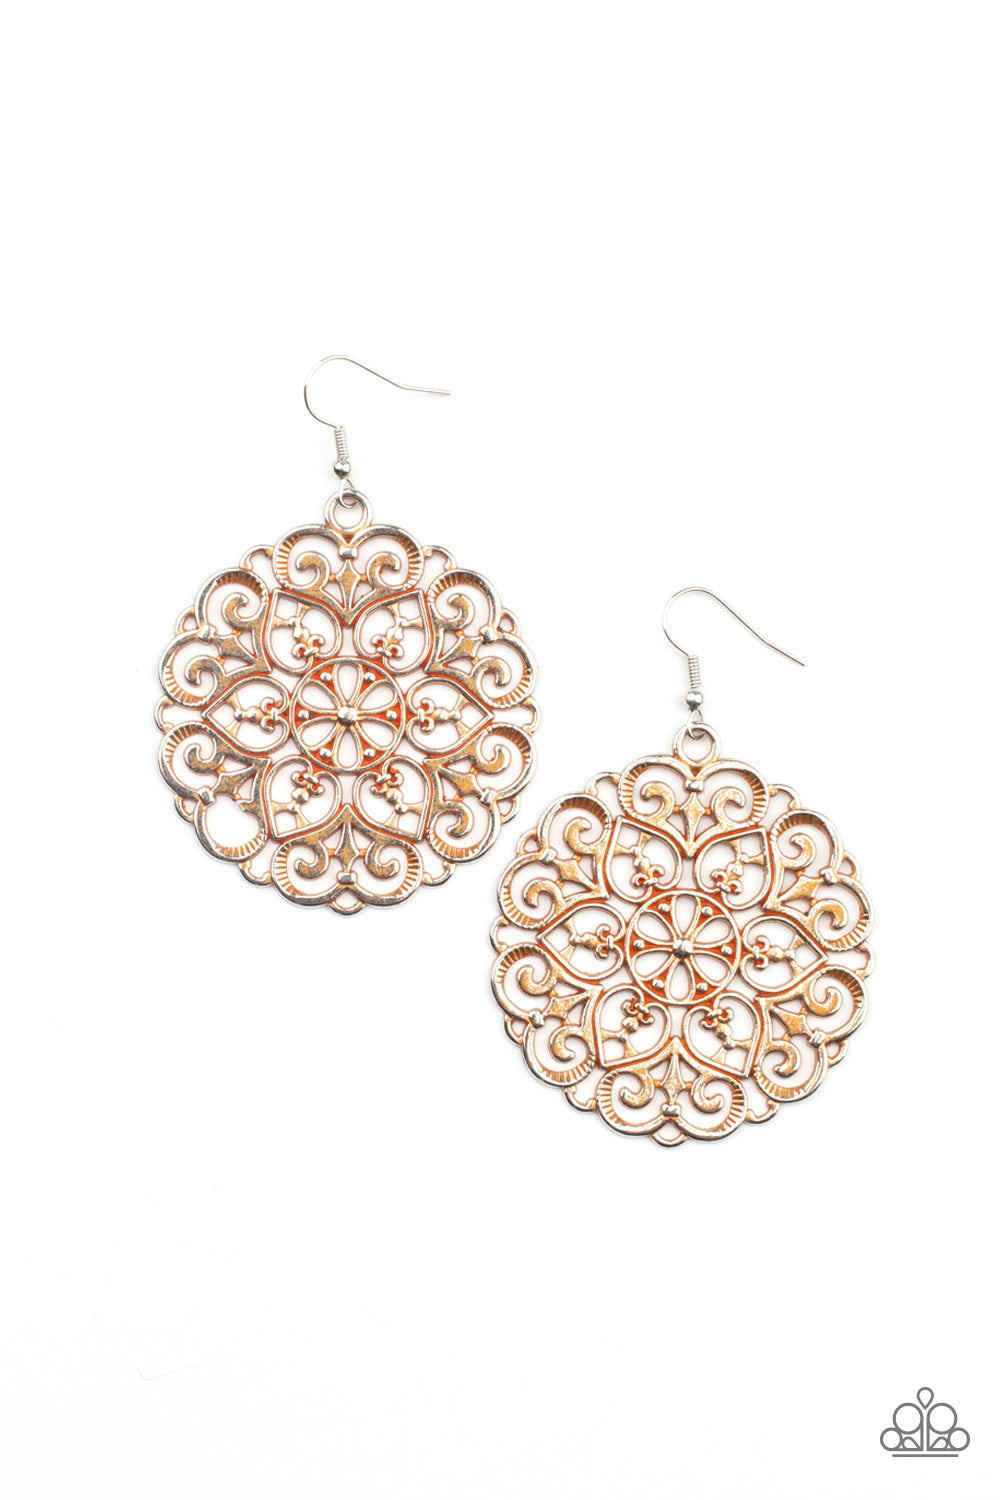 Paparazzi MANDALA Effect - Orange Rustic Earrings brushed in a rustic orange finish, an oversized mandala-like silver frame swings from the ear for a seasonal pop of color. Earring attaches to a standard fishhook fitting.  Sold as one pair of earrings.